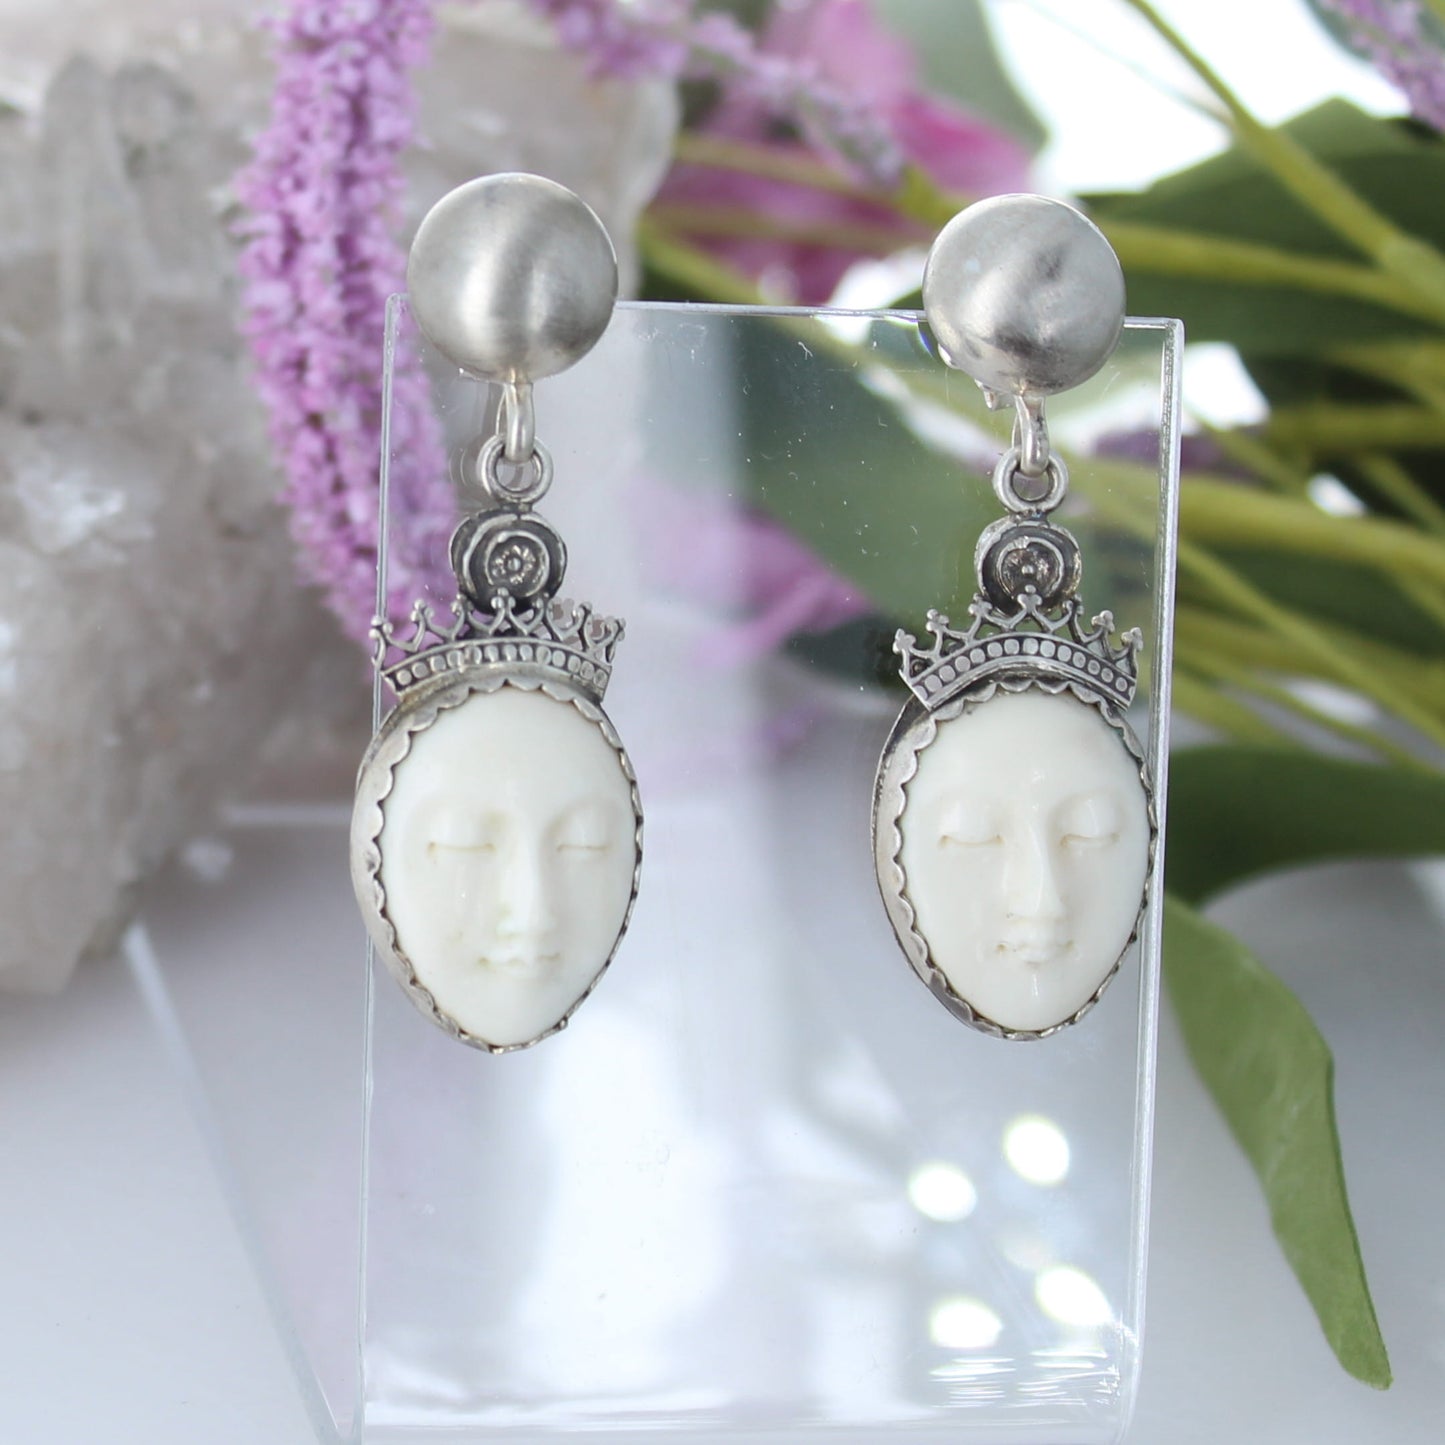 Unique Earrings Sterling Silver Carved Moon Goddess Faces